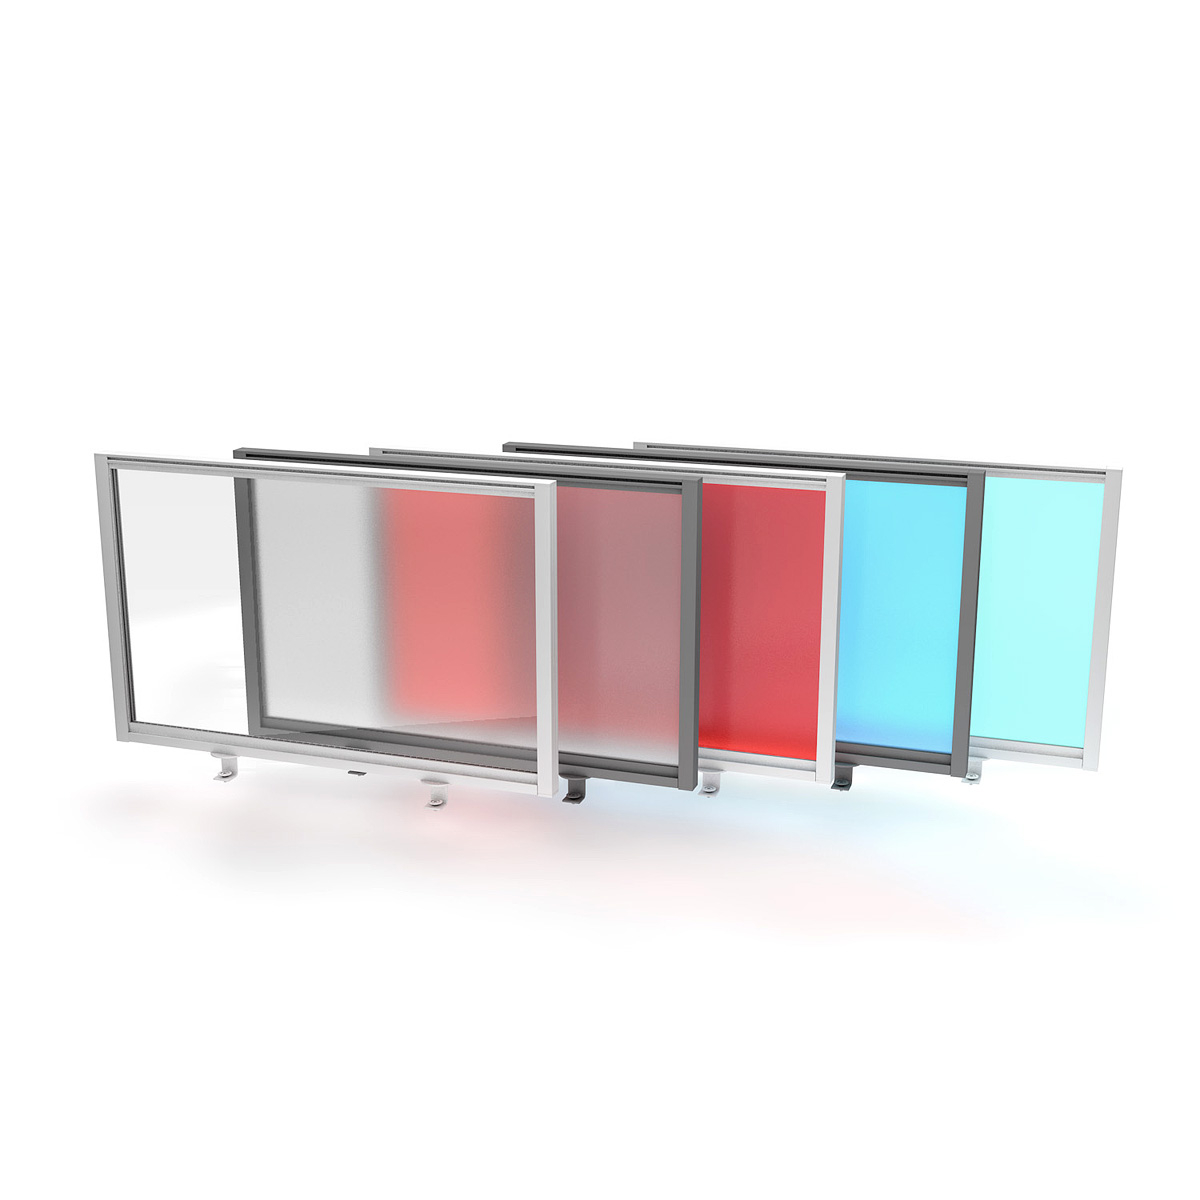 FRONTIER® Perspex Office Screen Desk Dividers With Five Perspex® Colour Options